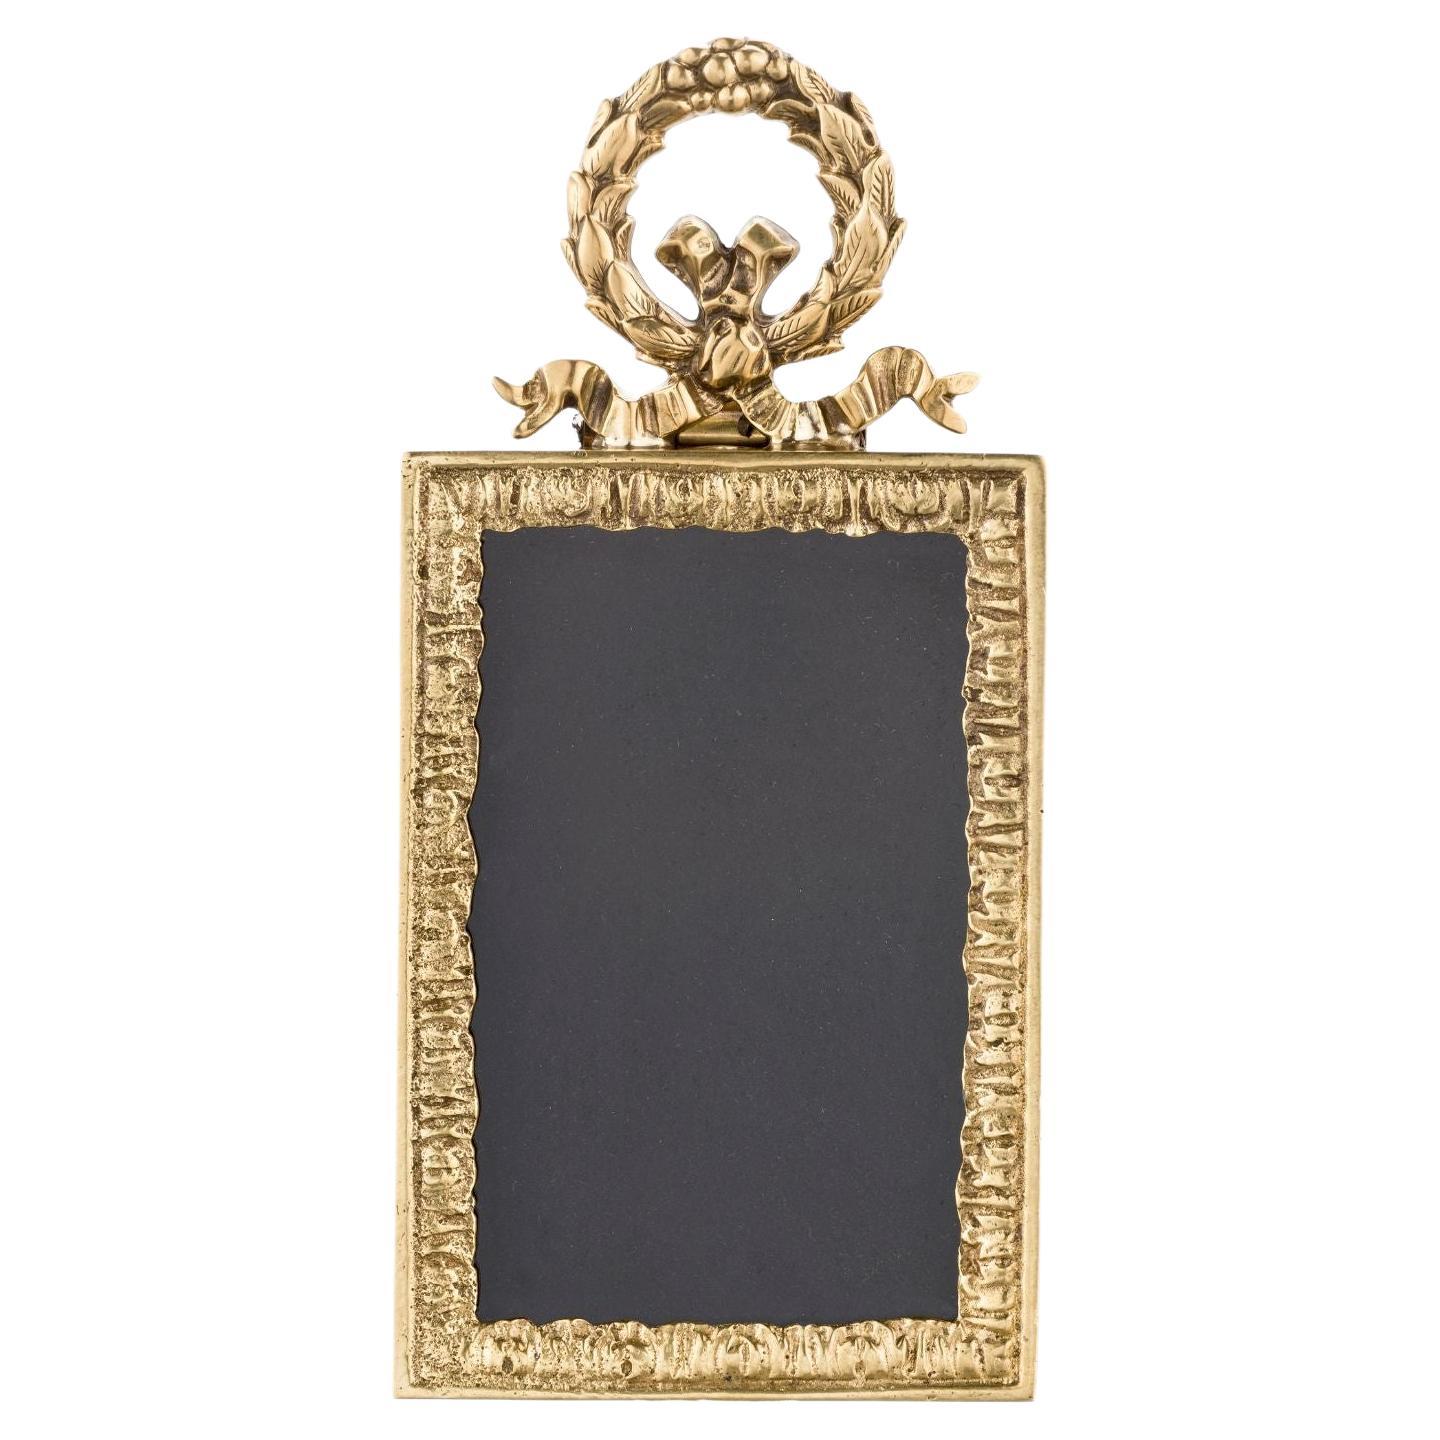 Sissi brass frame with garland For Sale